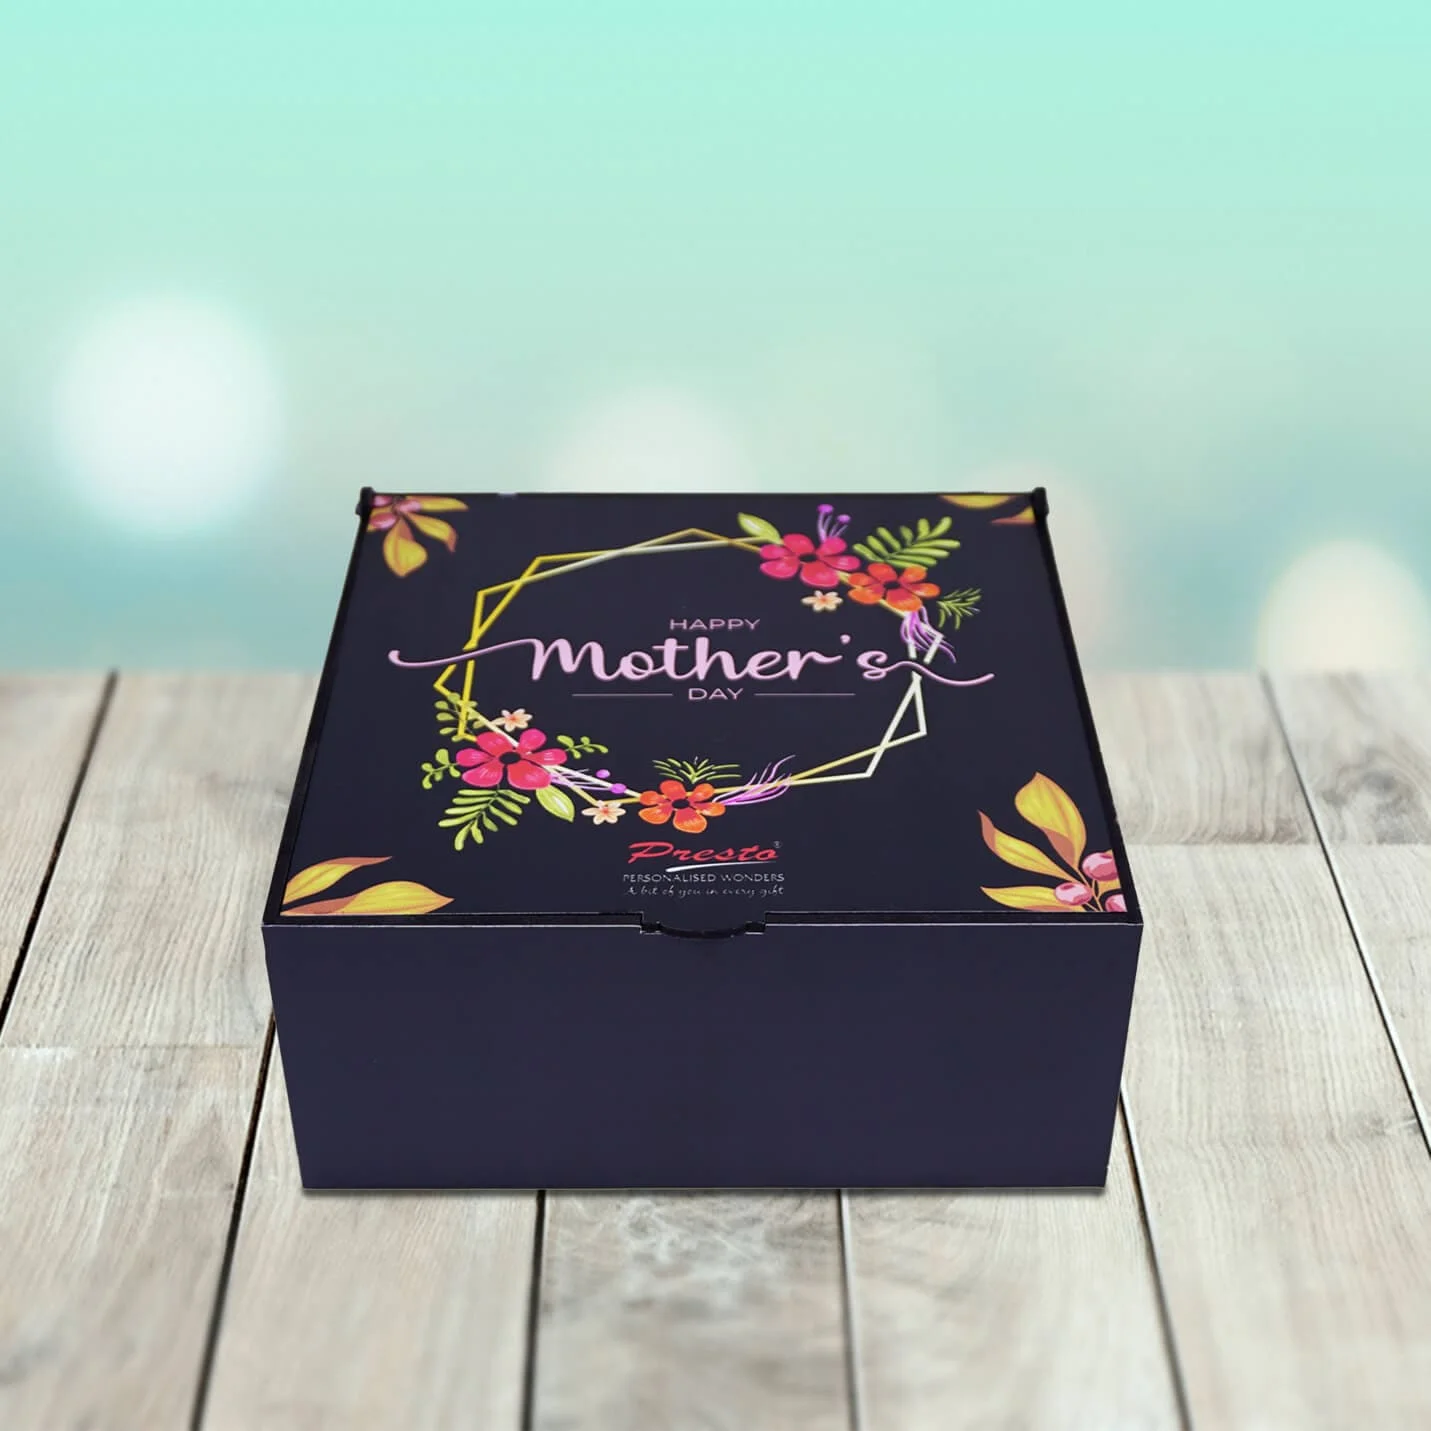 Customized Gift Box For Mother's Day